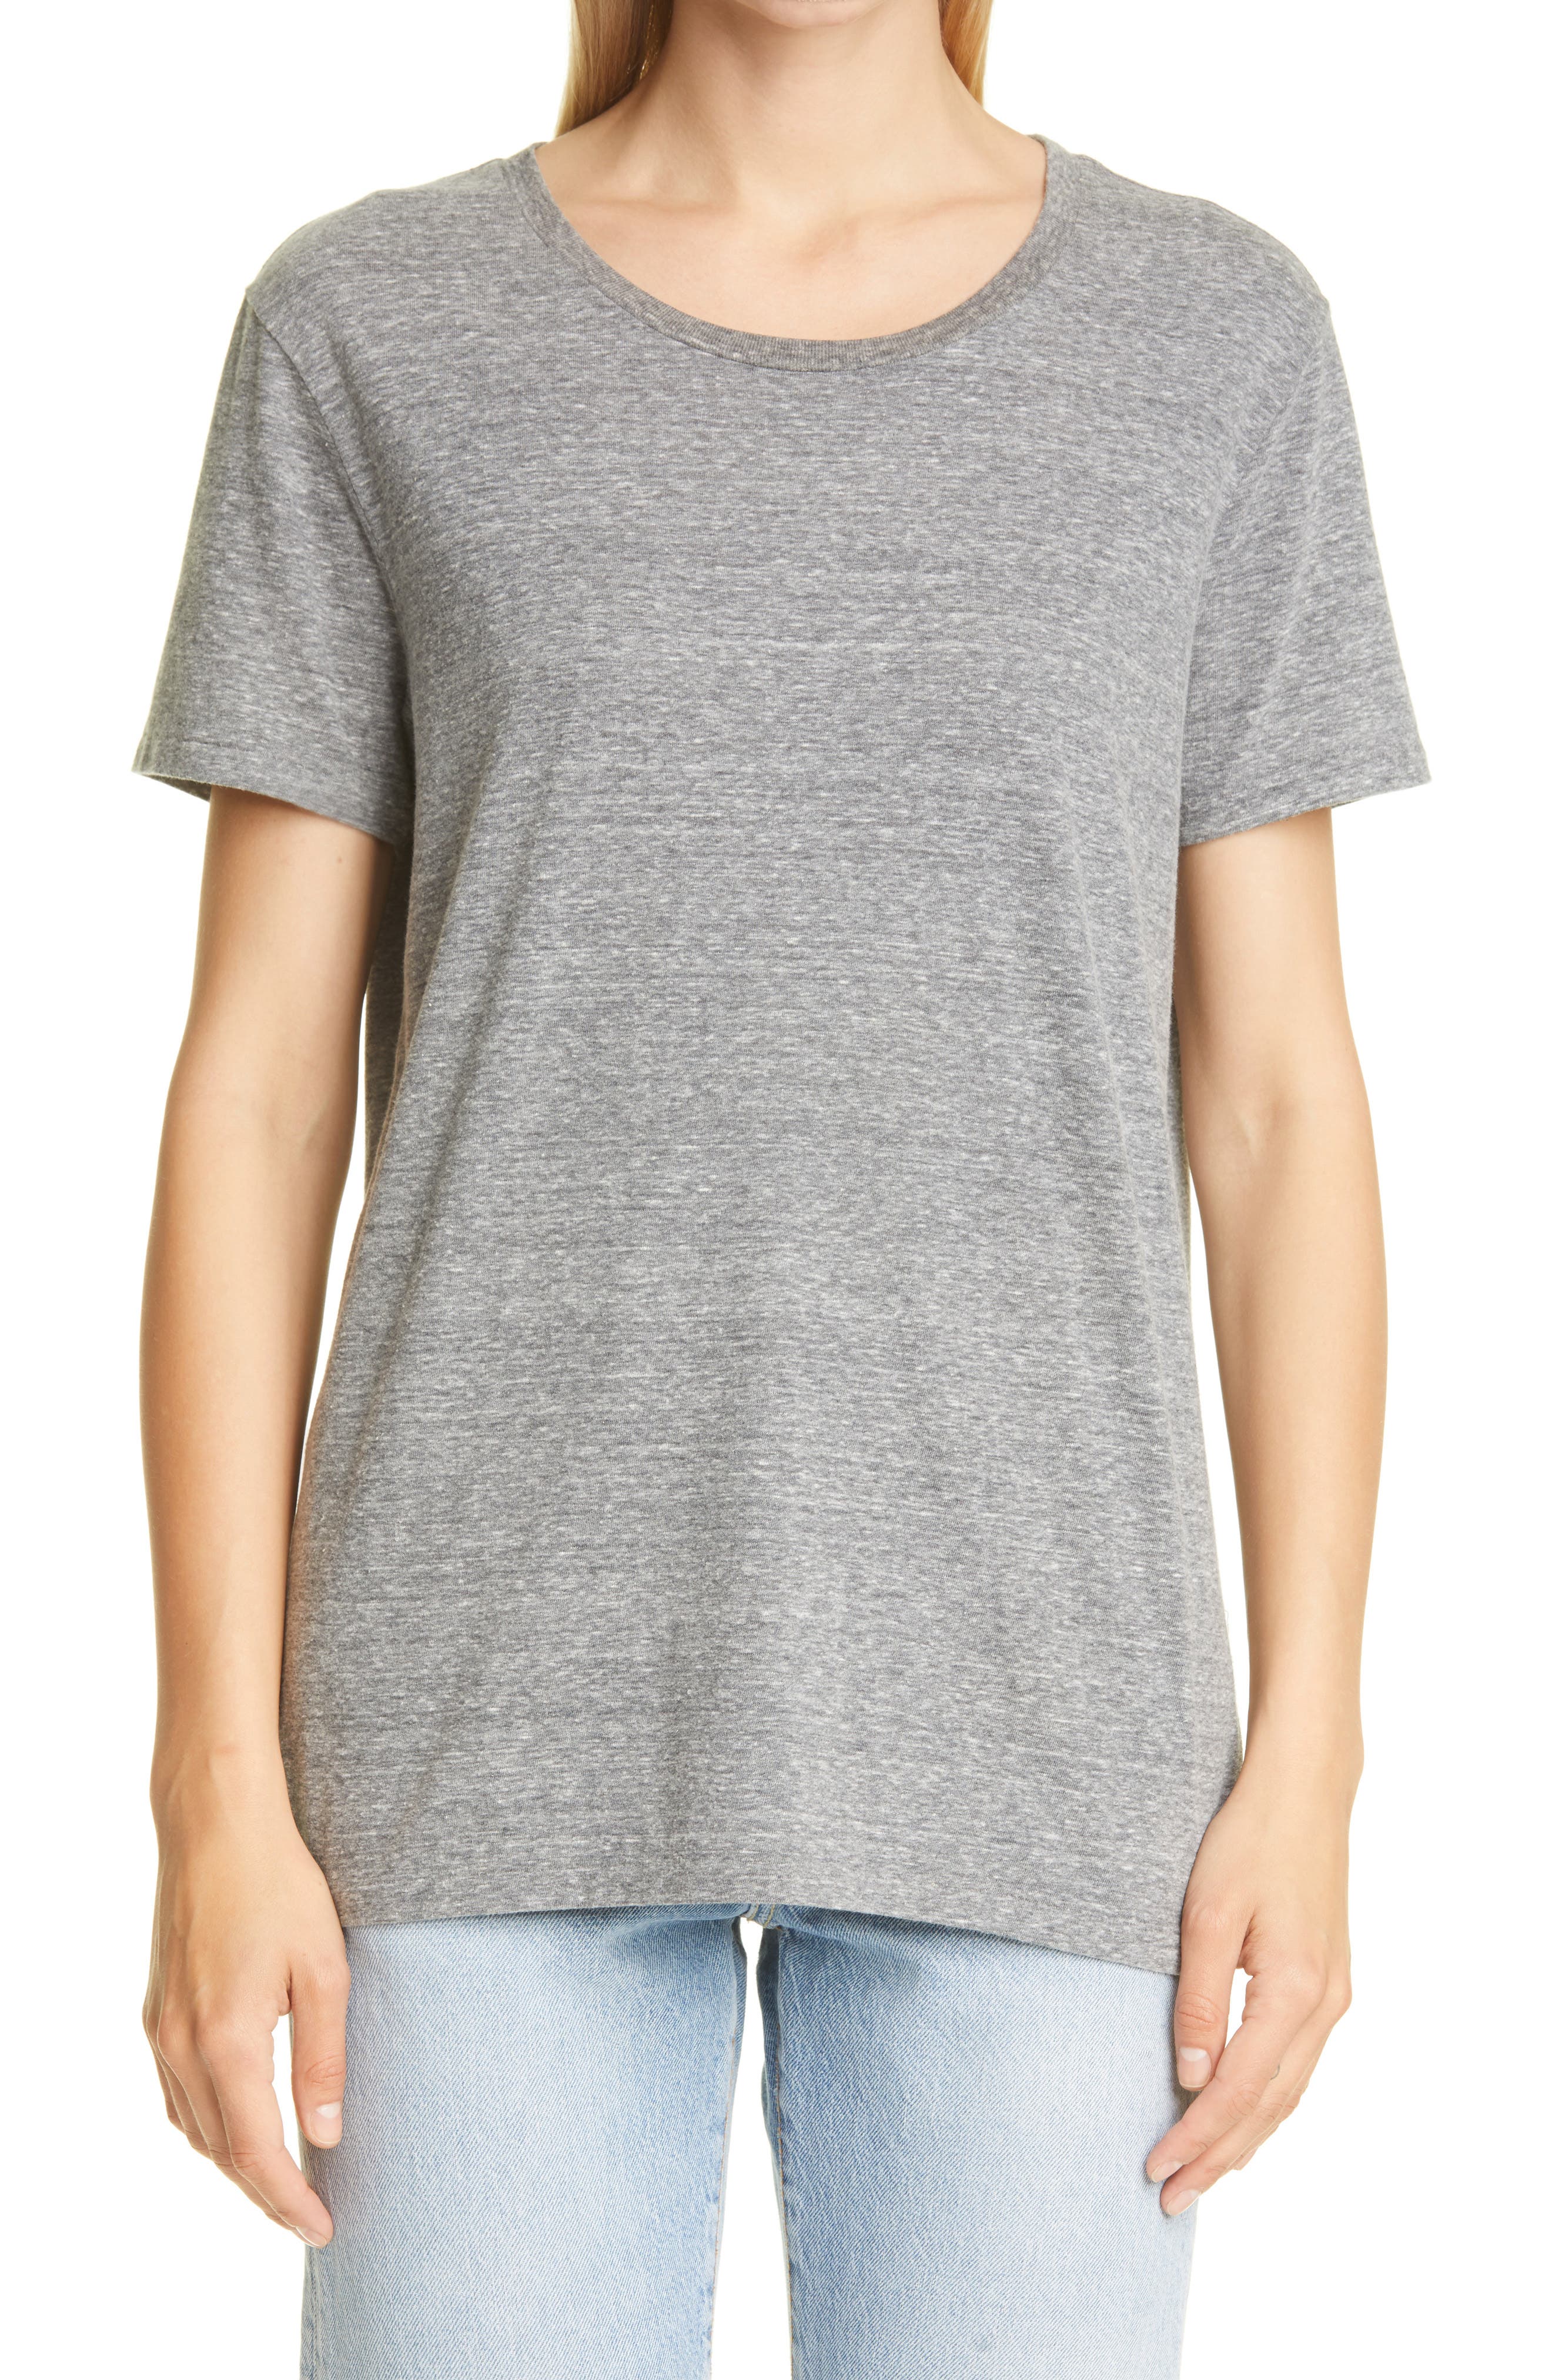 John Elliott Relaxed Cotton T-Shirt in Heather Grey at Nordstrom, Size 4